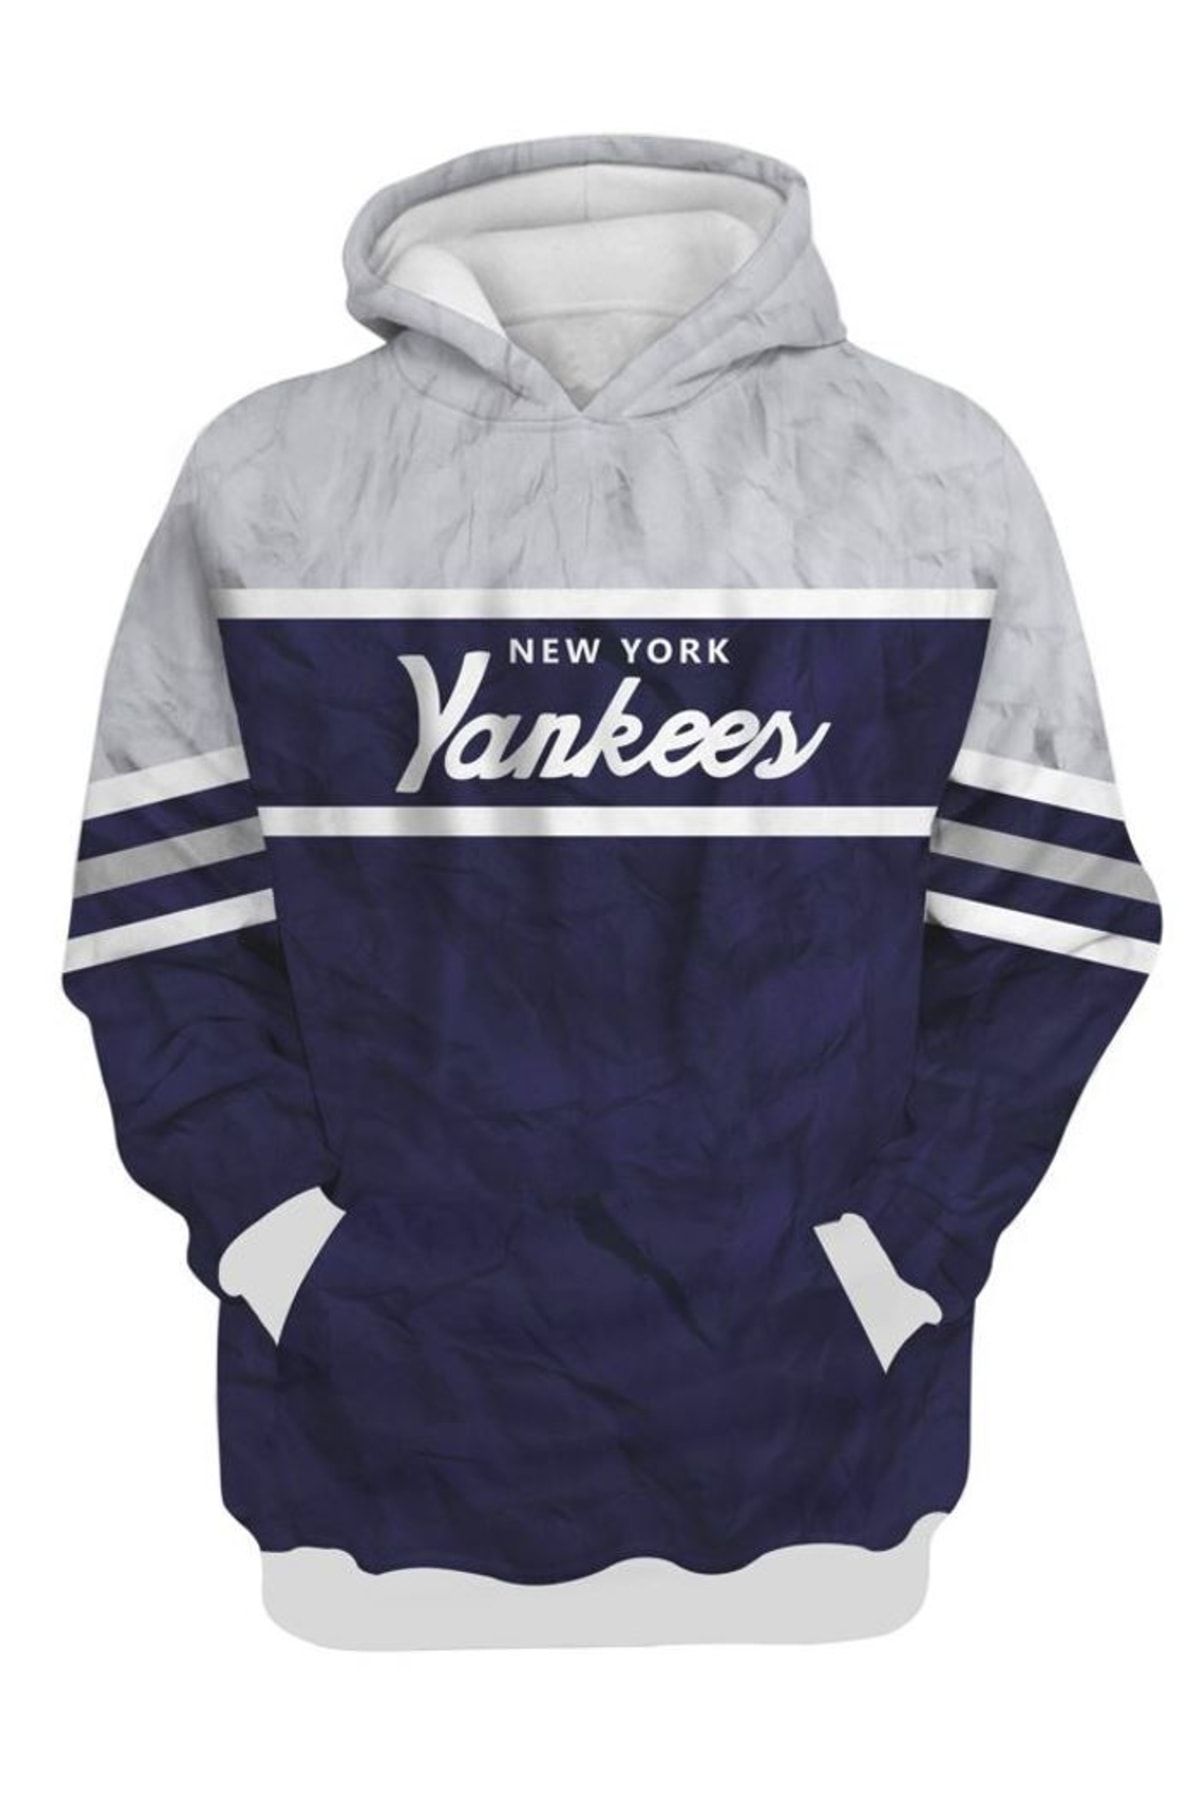 Usateamfans New York Yankees 3d Oversize Hoodie